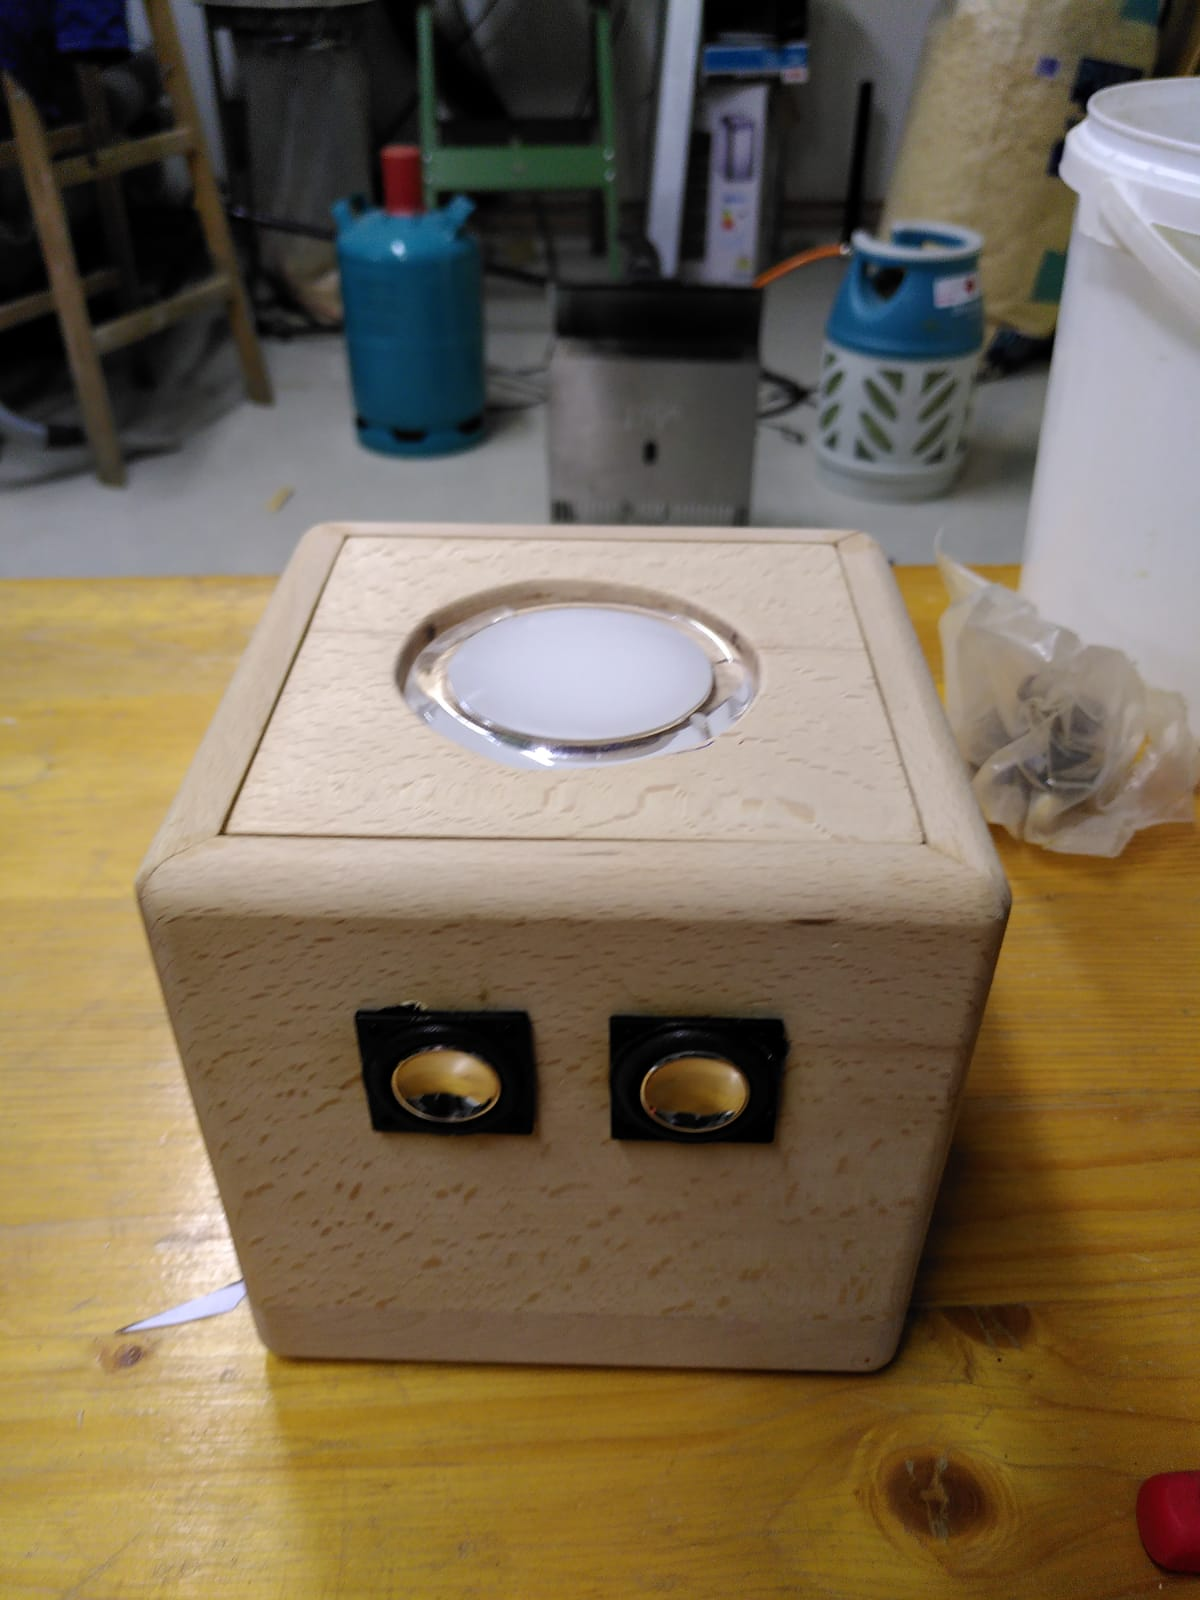 Music-Box with speakers and transparent plastic on top